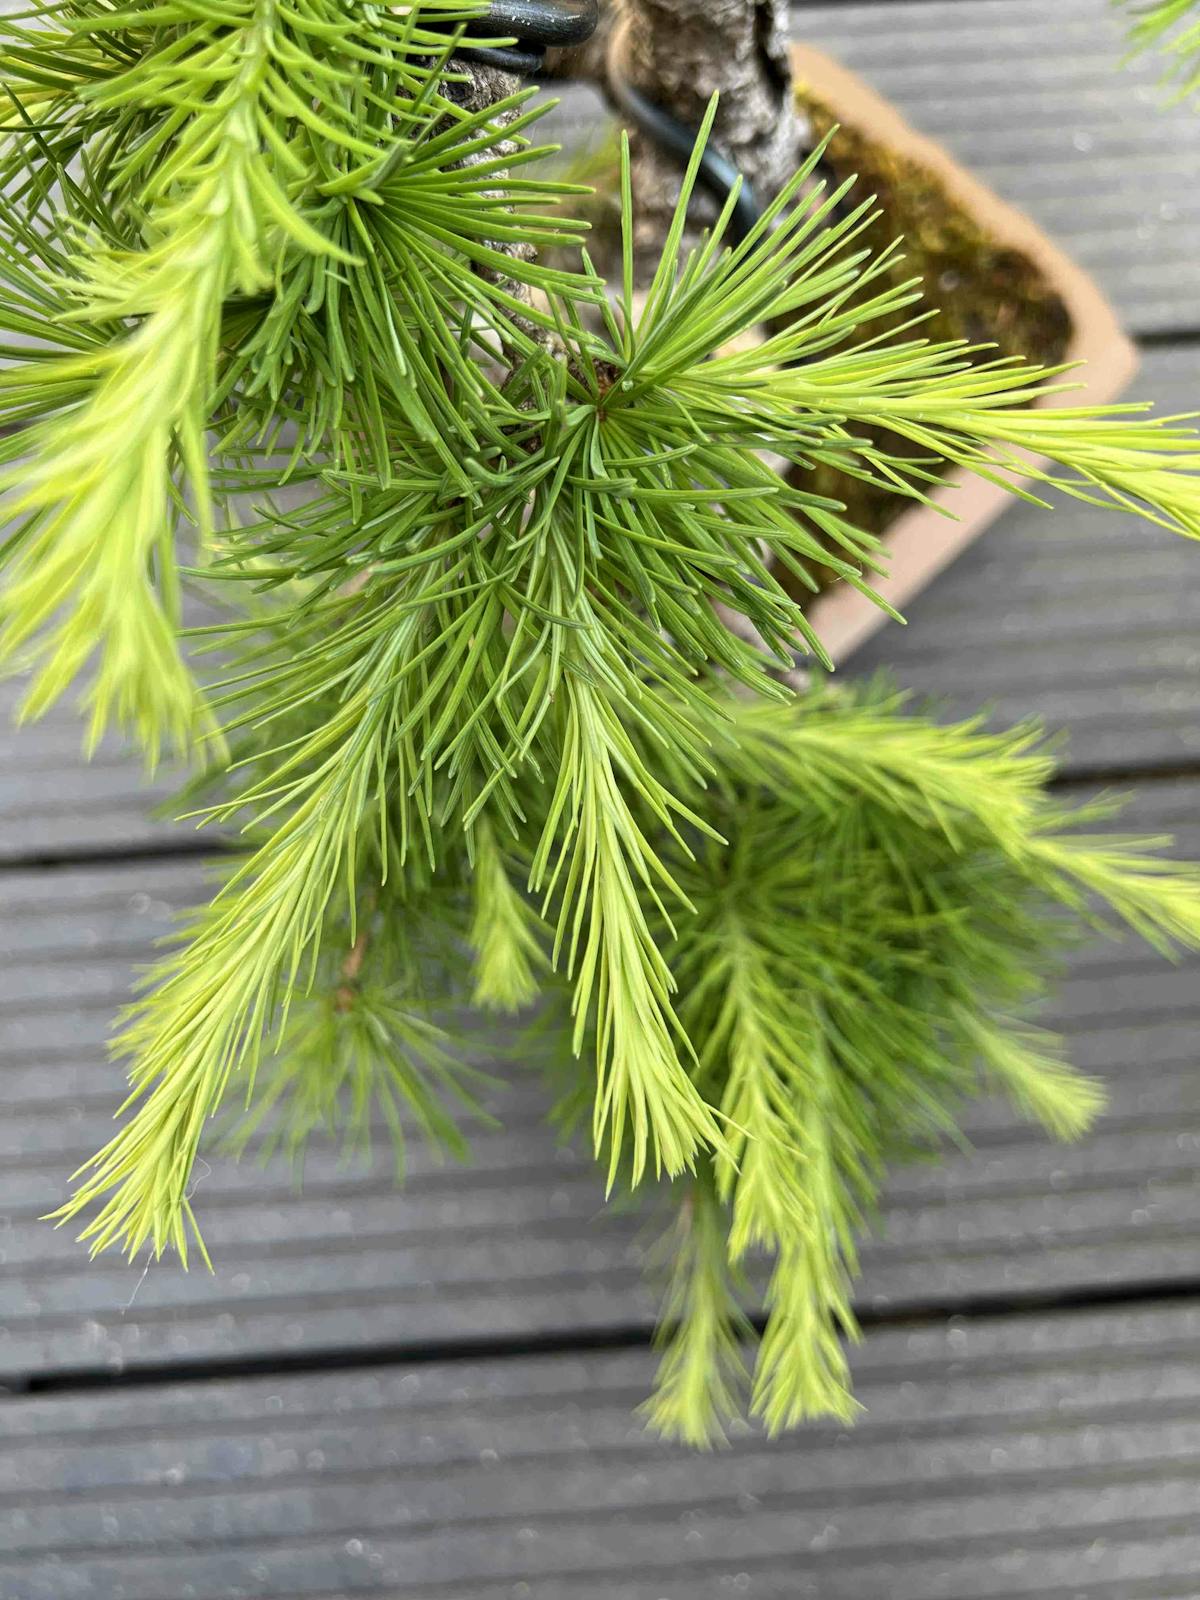 Larch bonsai before pruning new growth